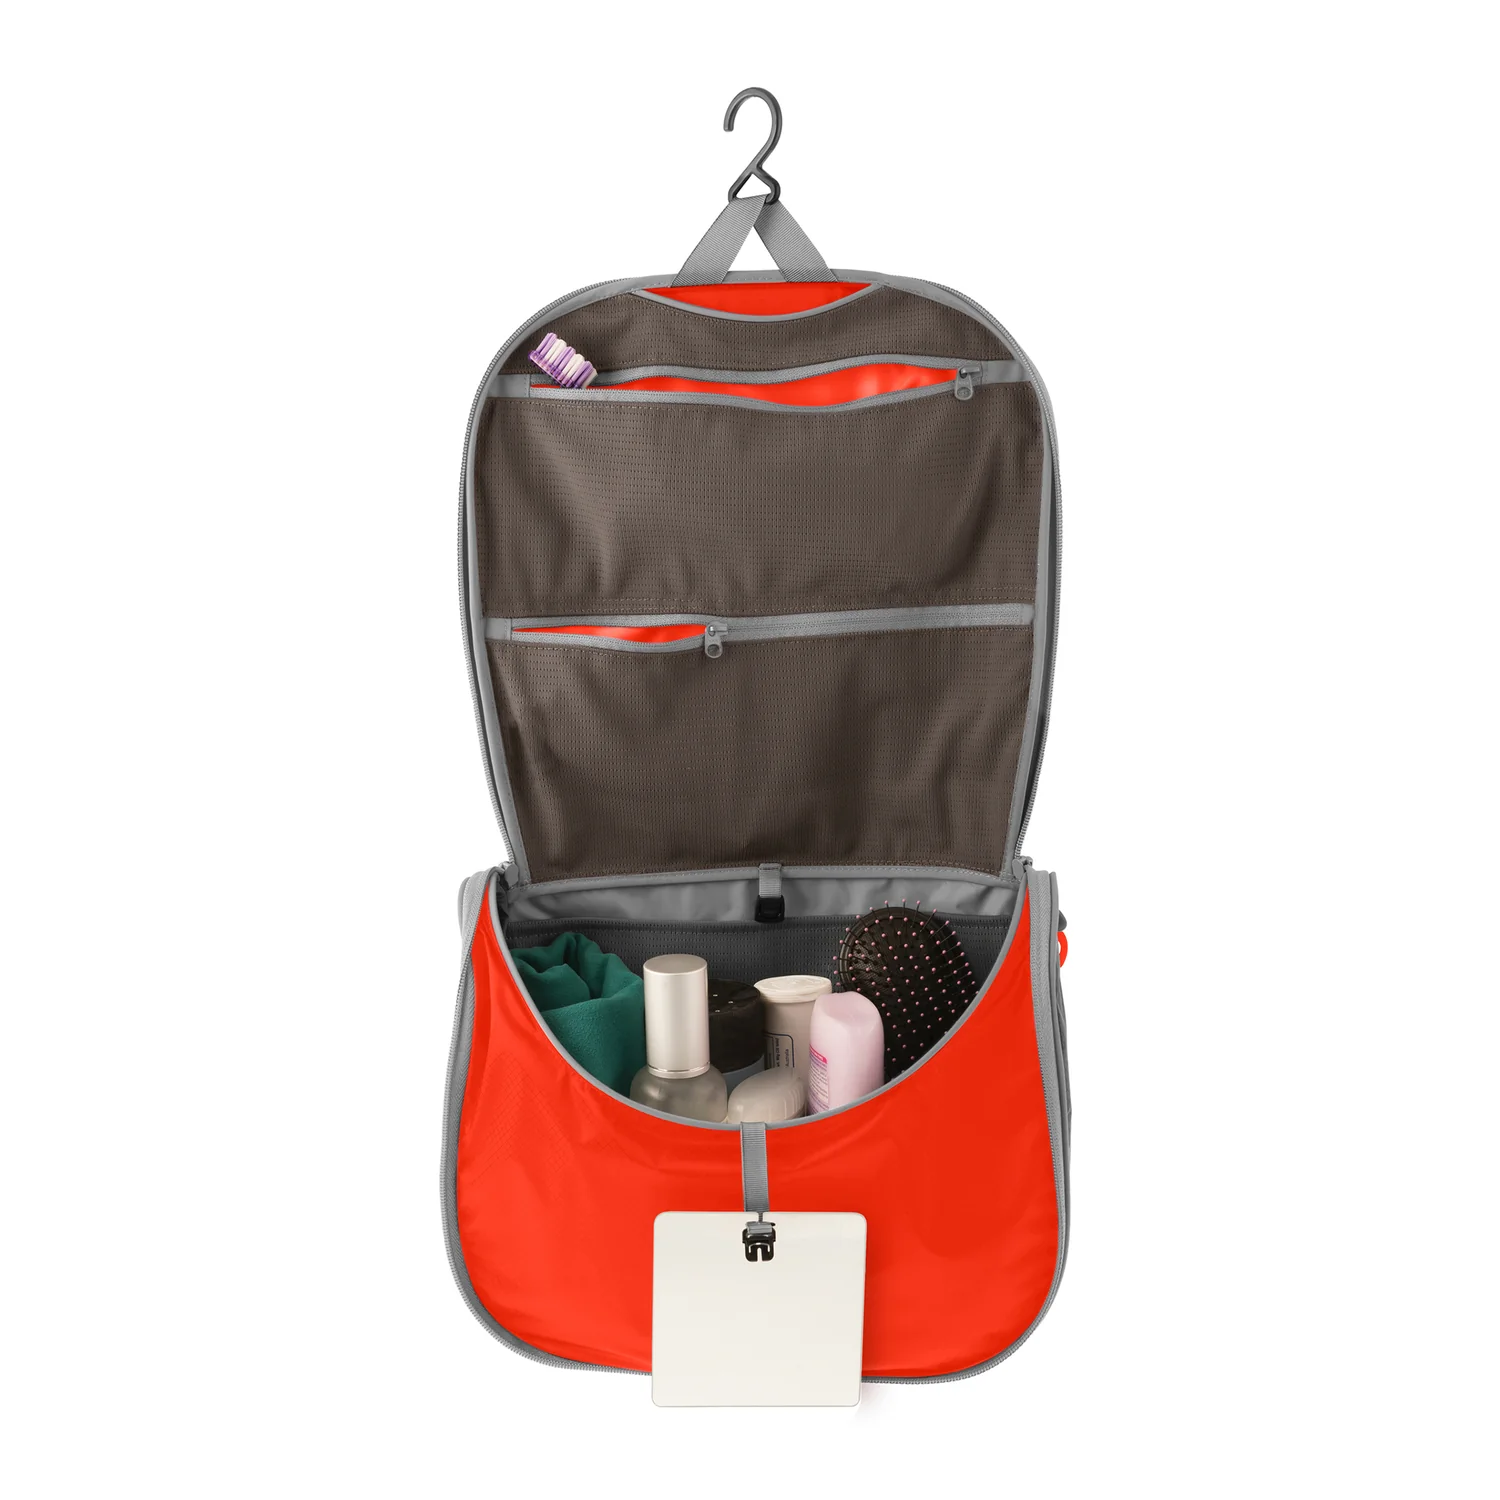 https://www.touristsecrets.com/wp-content/uploads/2023/09/10-best-sea-to-summit-travelling-light-hanging-toiletry-bag-small-for-2023-1695472635.jpeg